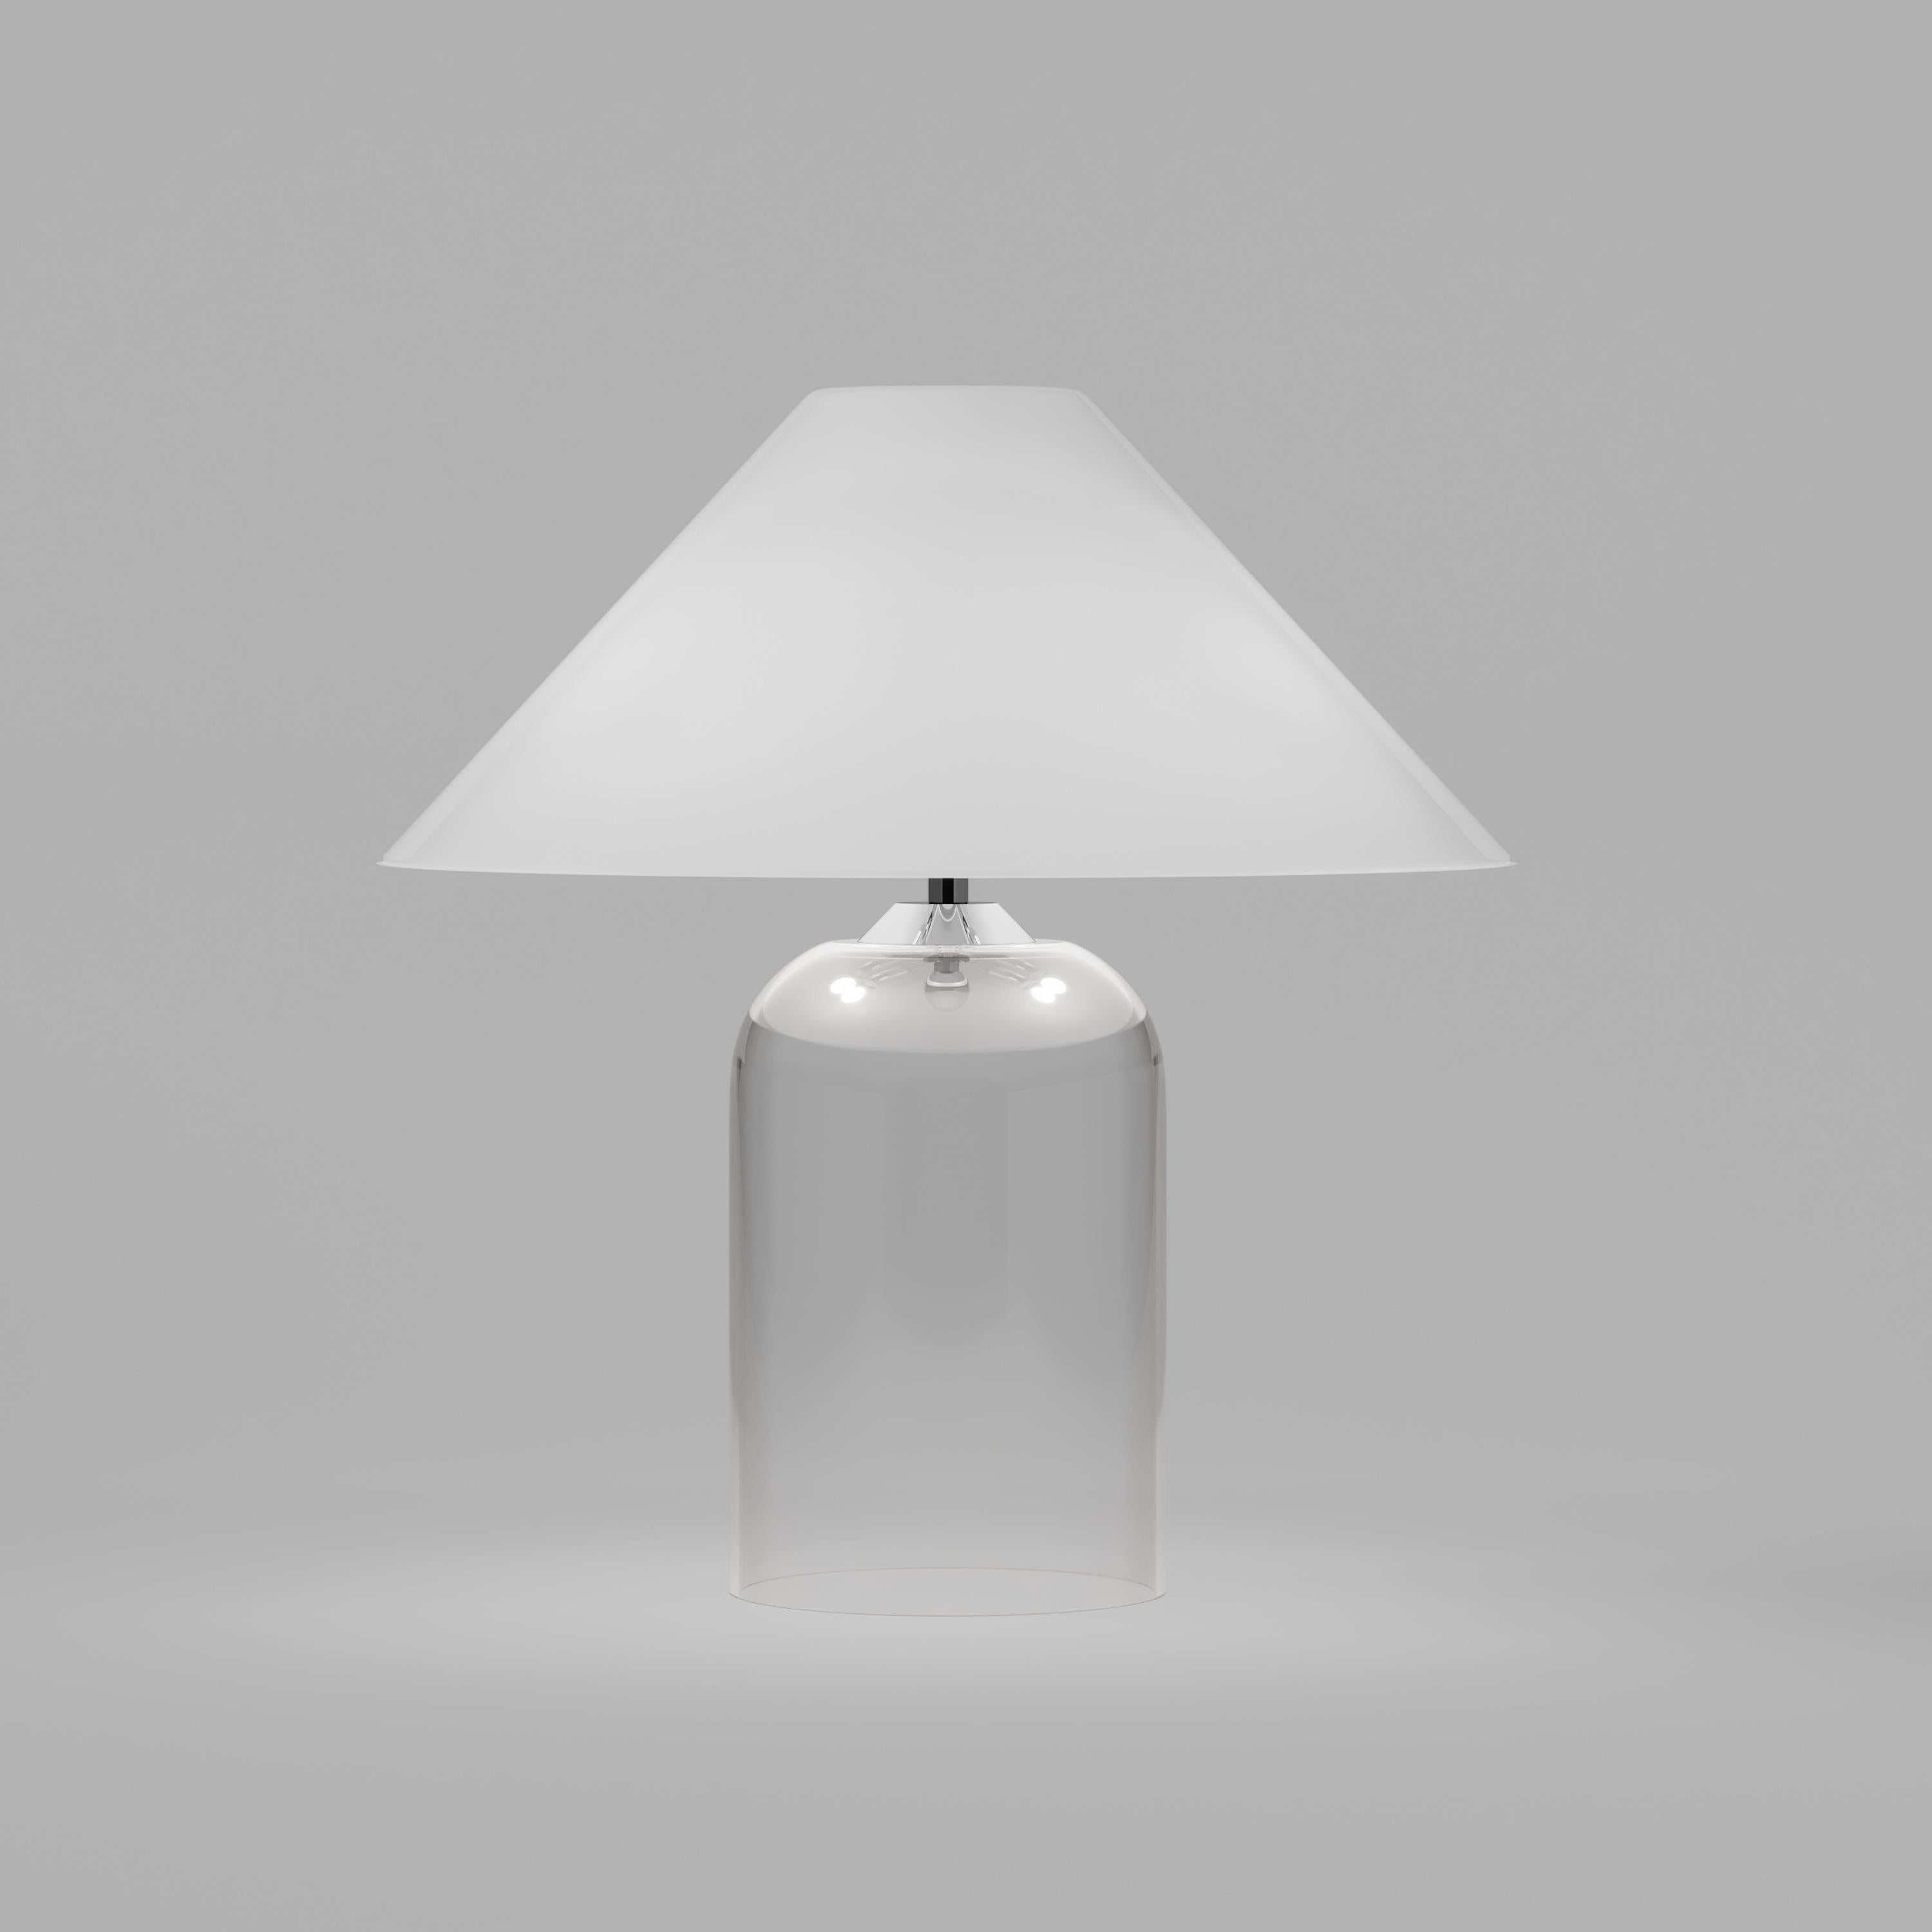 A design that combines a classical concept with a retro inspiration. The transparent base and the white diffuser give a warm accent to the light. Shade in glossy white, base in crystal. Metal parts in chrome. E12 lighting.
 